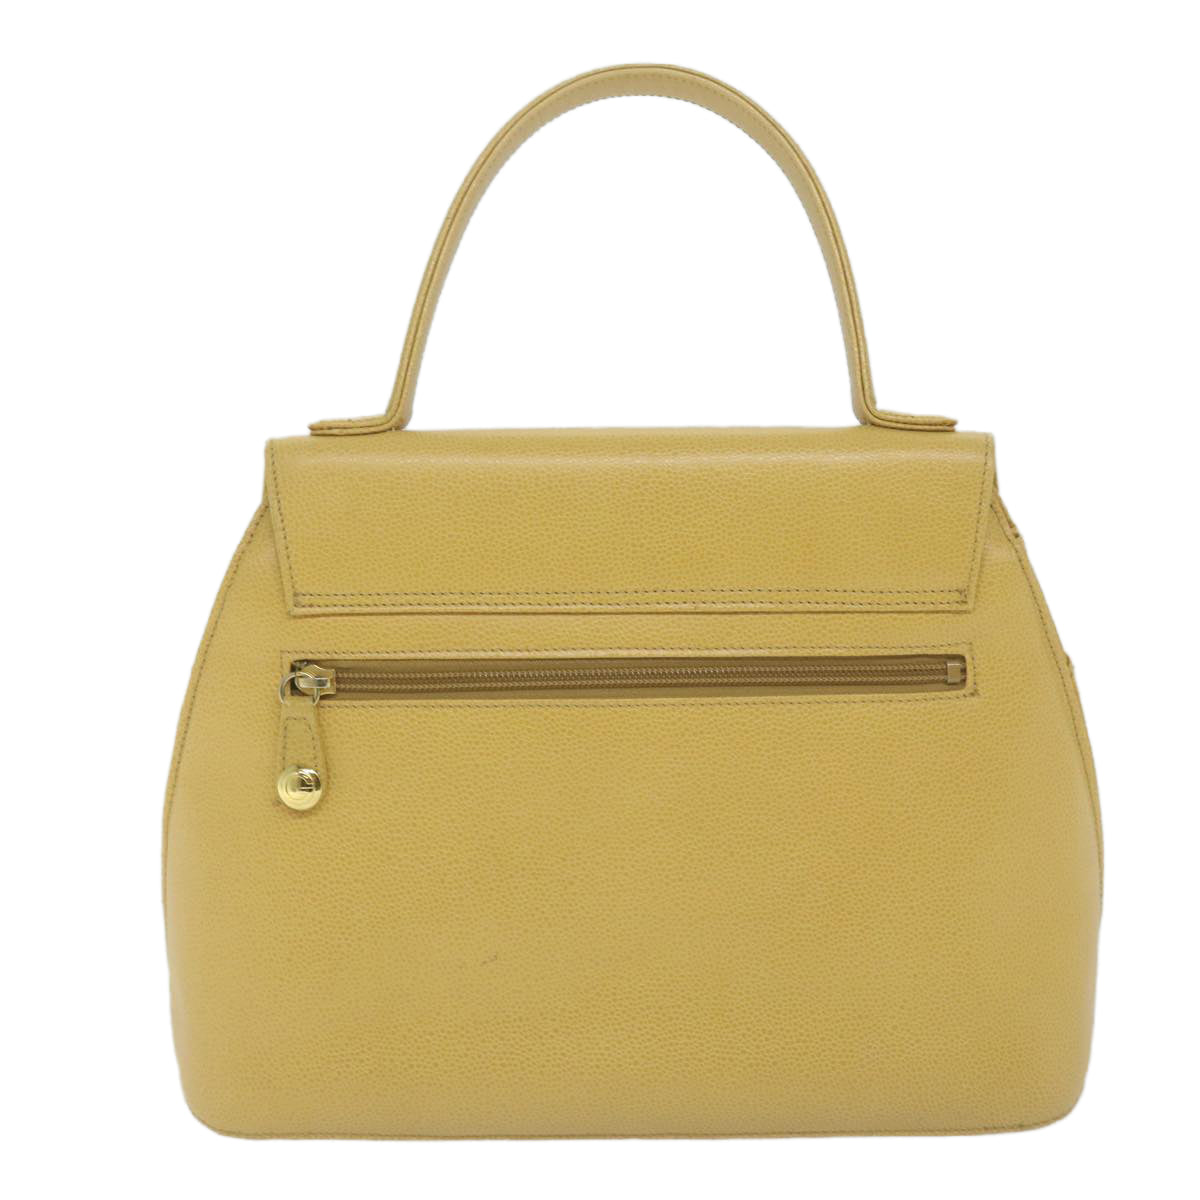 GIVENCHY Hand Bag Leather Yellow Auth am5714